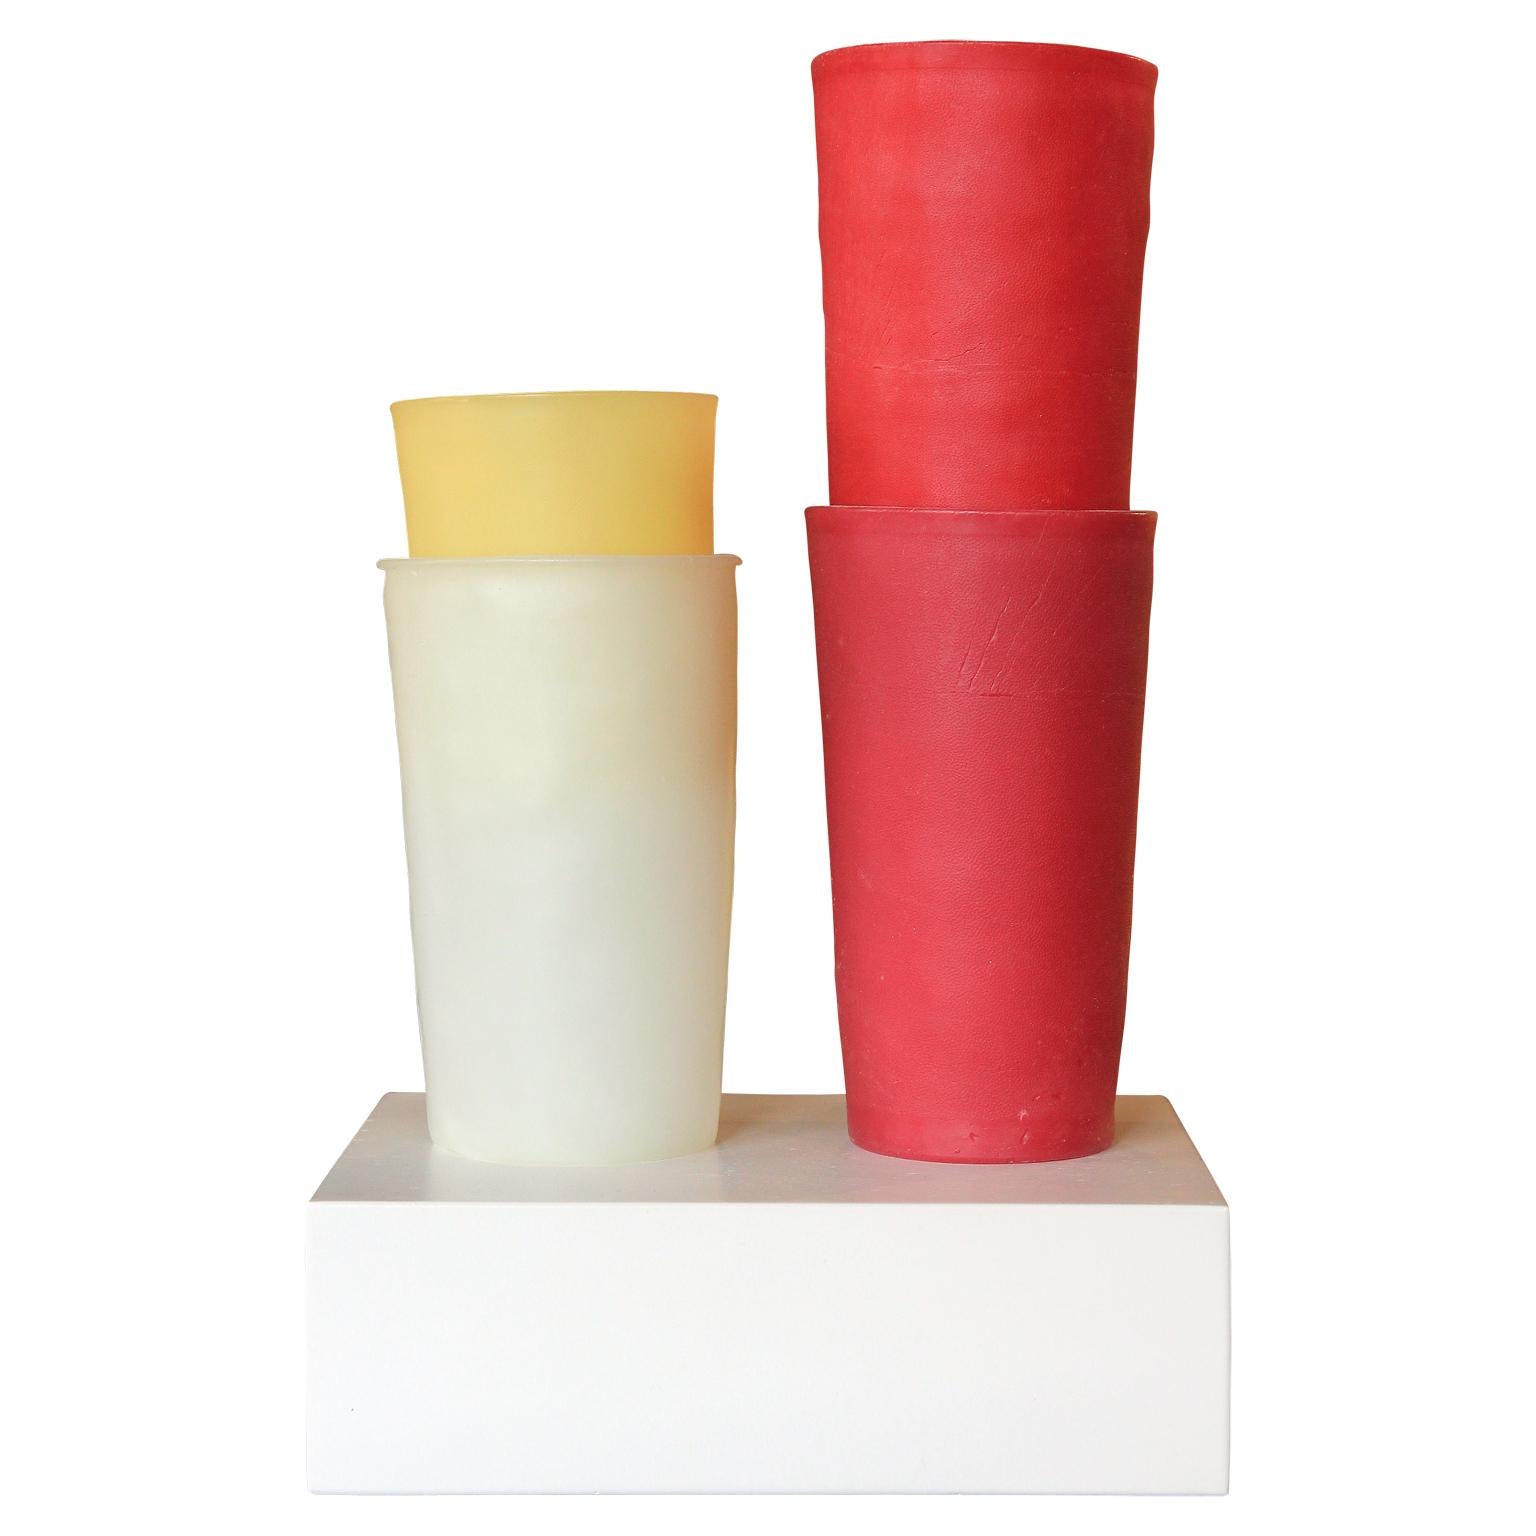 "Untitled #2 (Tupperware)" Red, Yellow, & White Realistic Beeswax Cup Sculpture